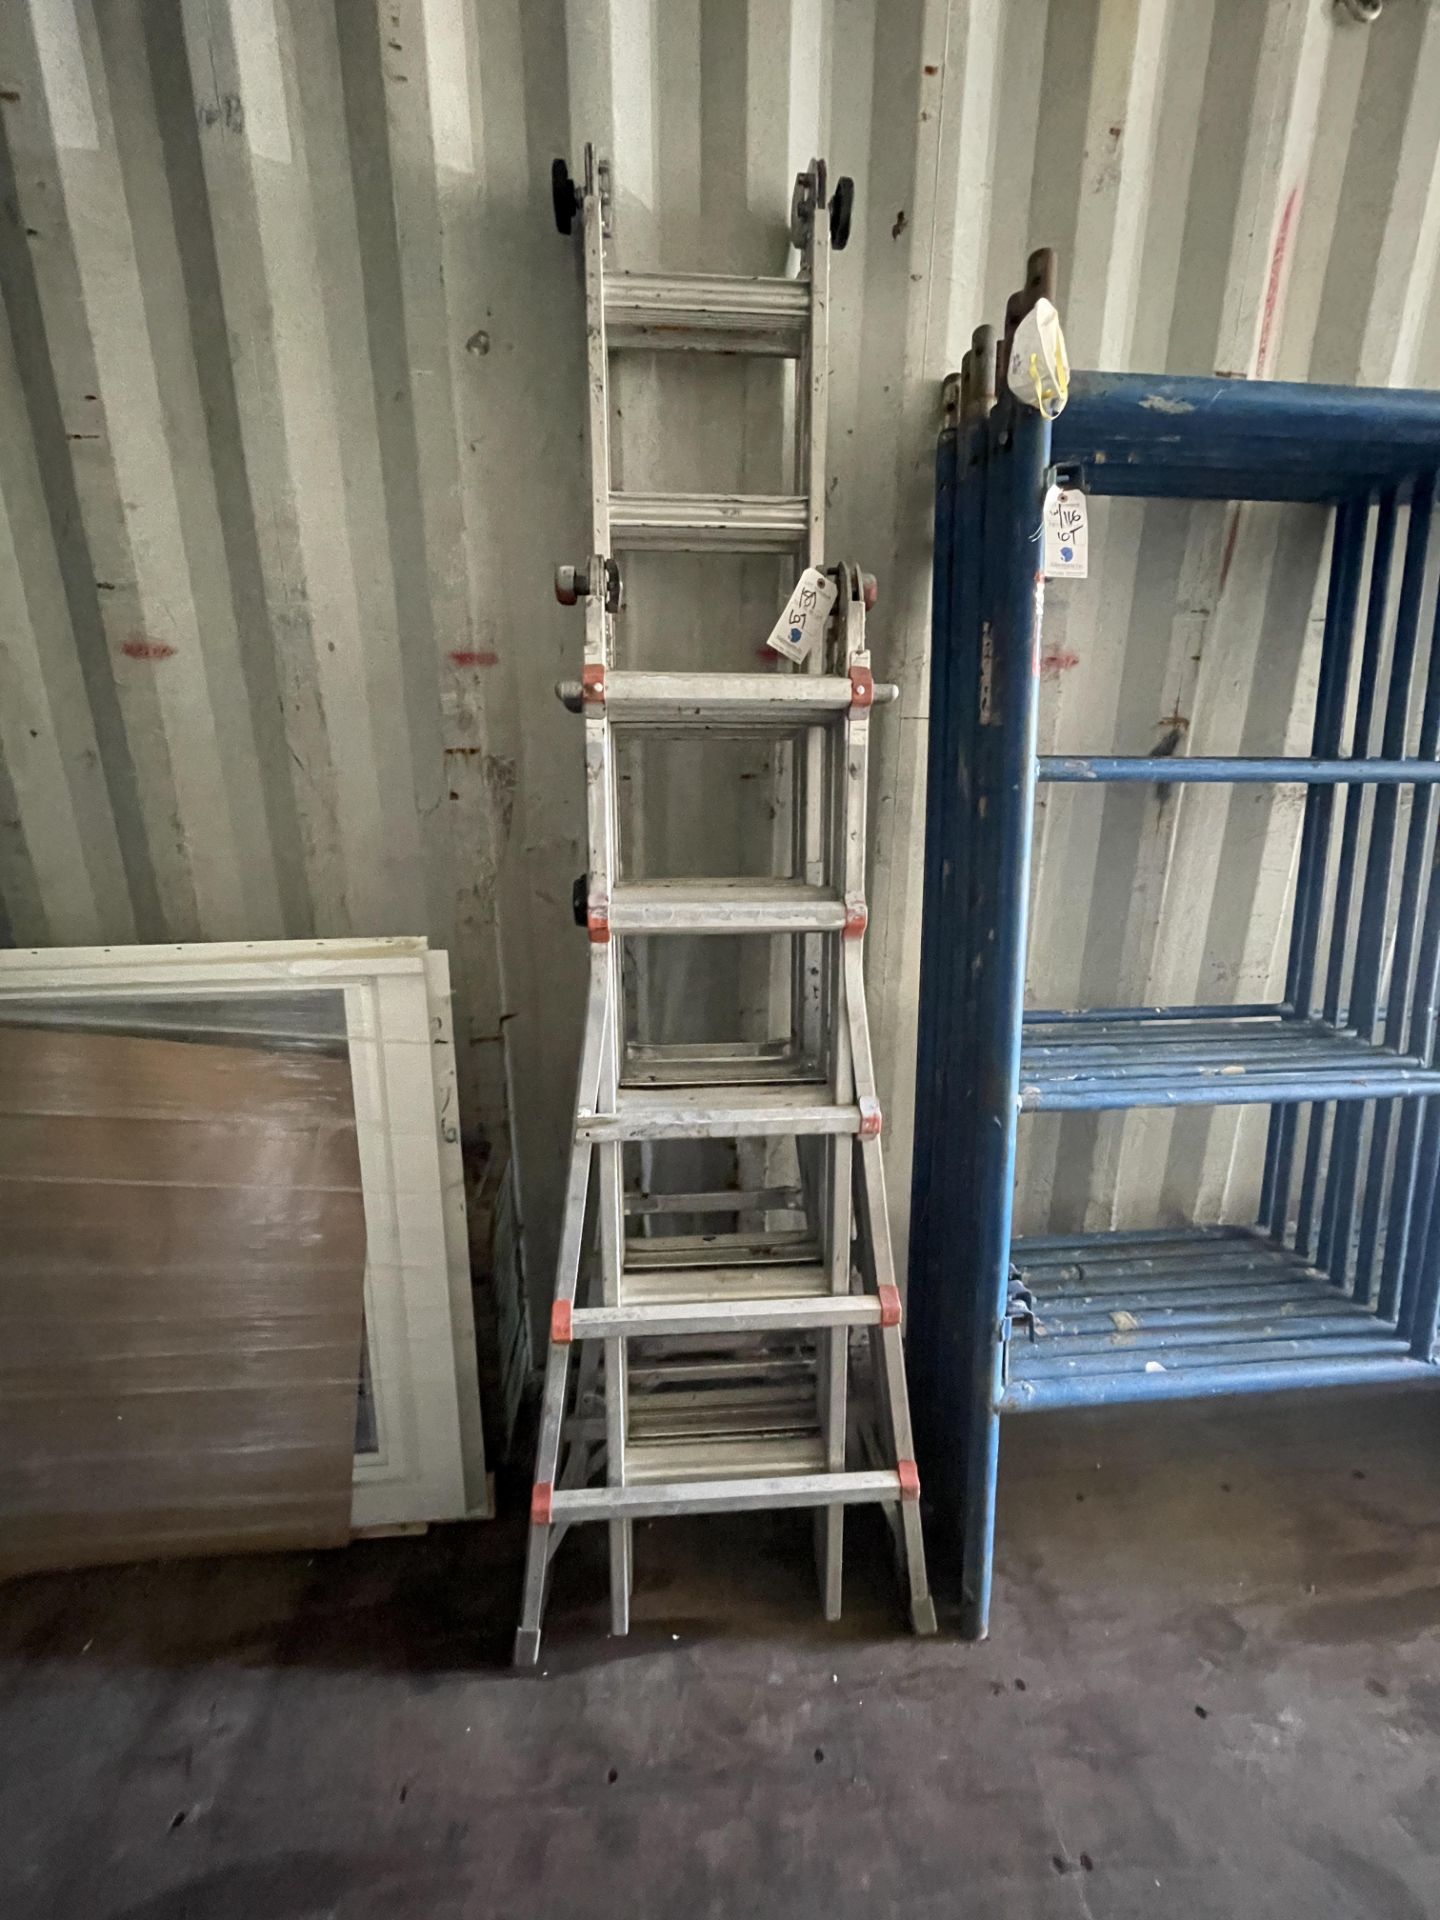 {LOT} Balance in Container C/O: Ladders, Fan, Metal, Motors, Plastic and Metal Drums in One Box - Image 5 of 5